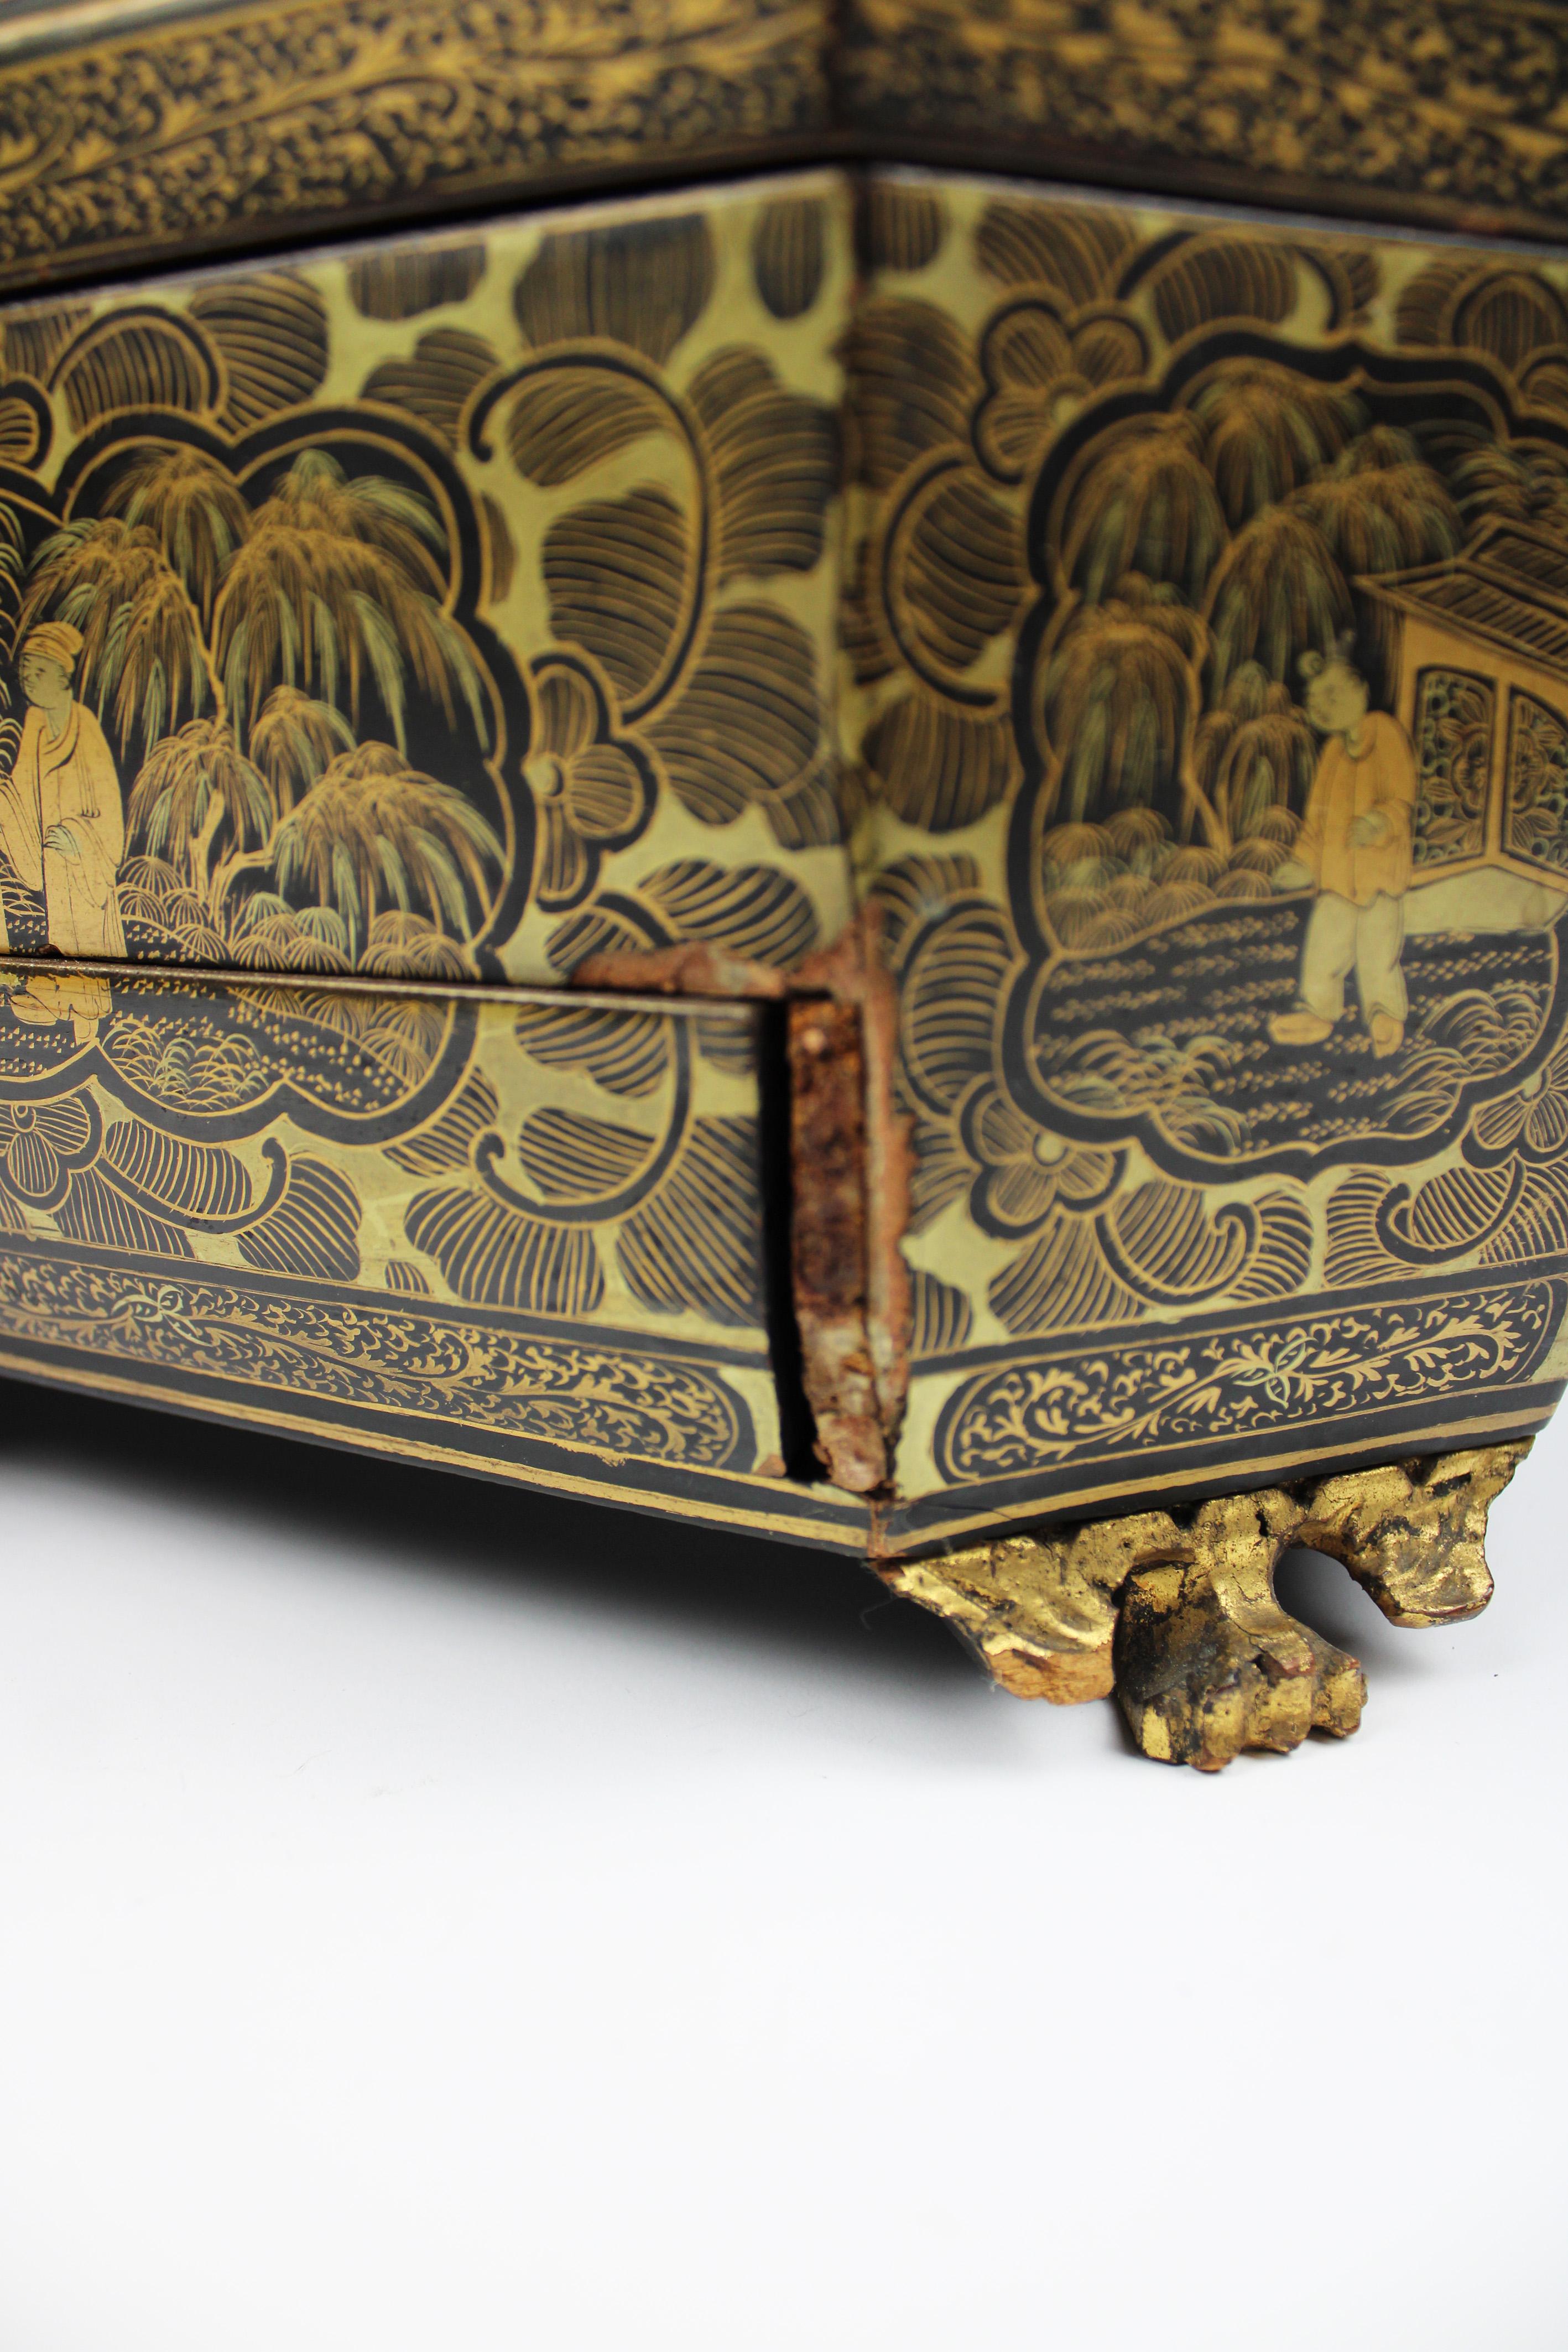 19th Century Chinese Lacquer Sewing Box Antique Chinoiserie Black Gilt For Sale 7